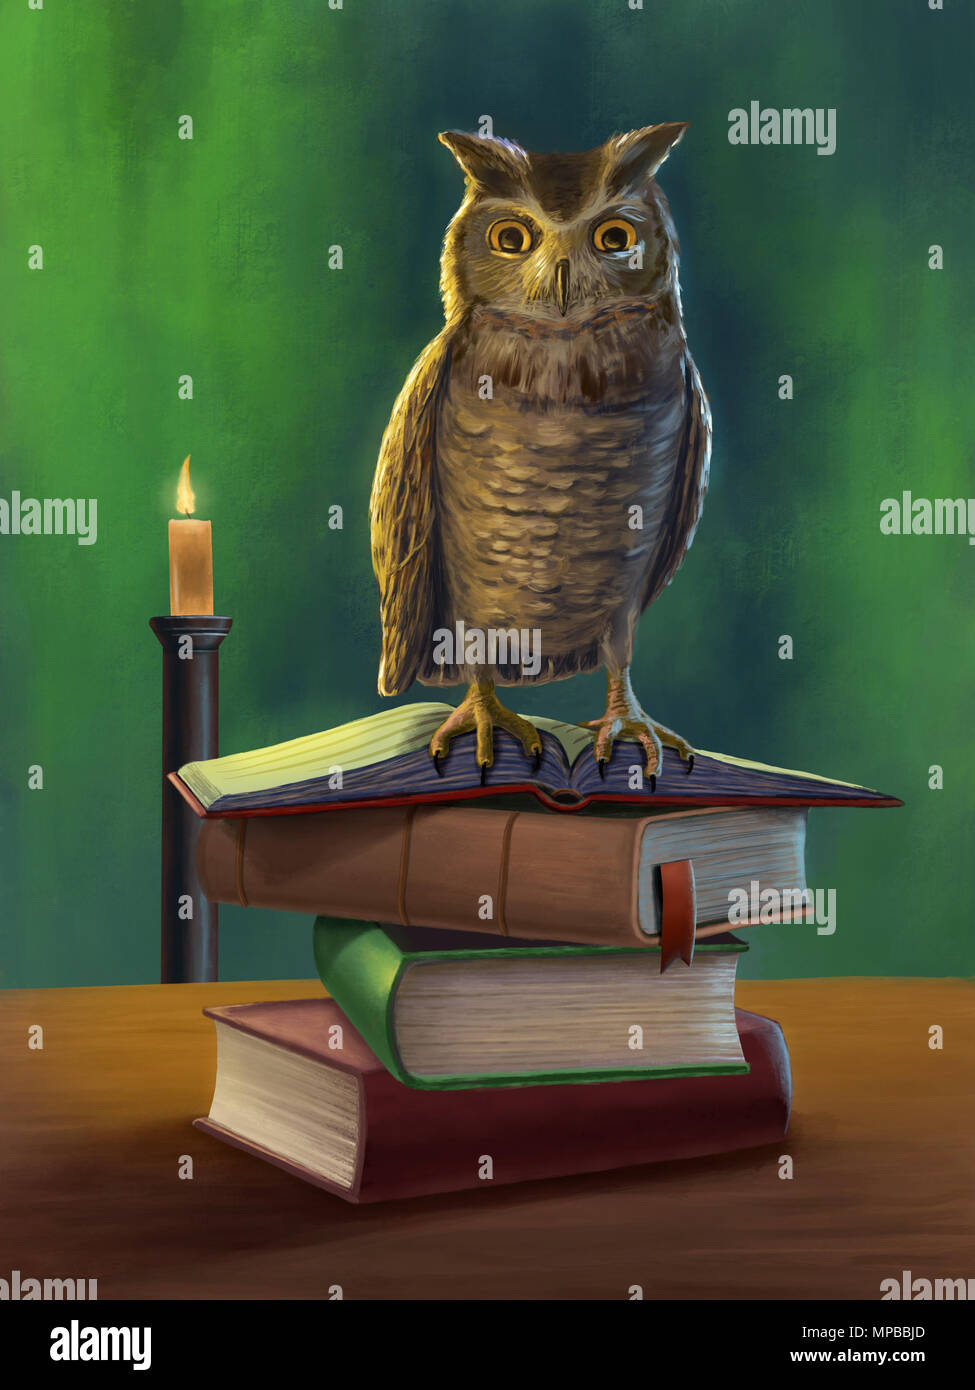 Wise owl perched on a pile of books. Digital illustration. Stock Photo